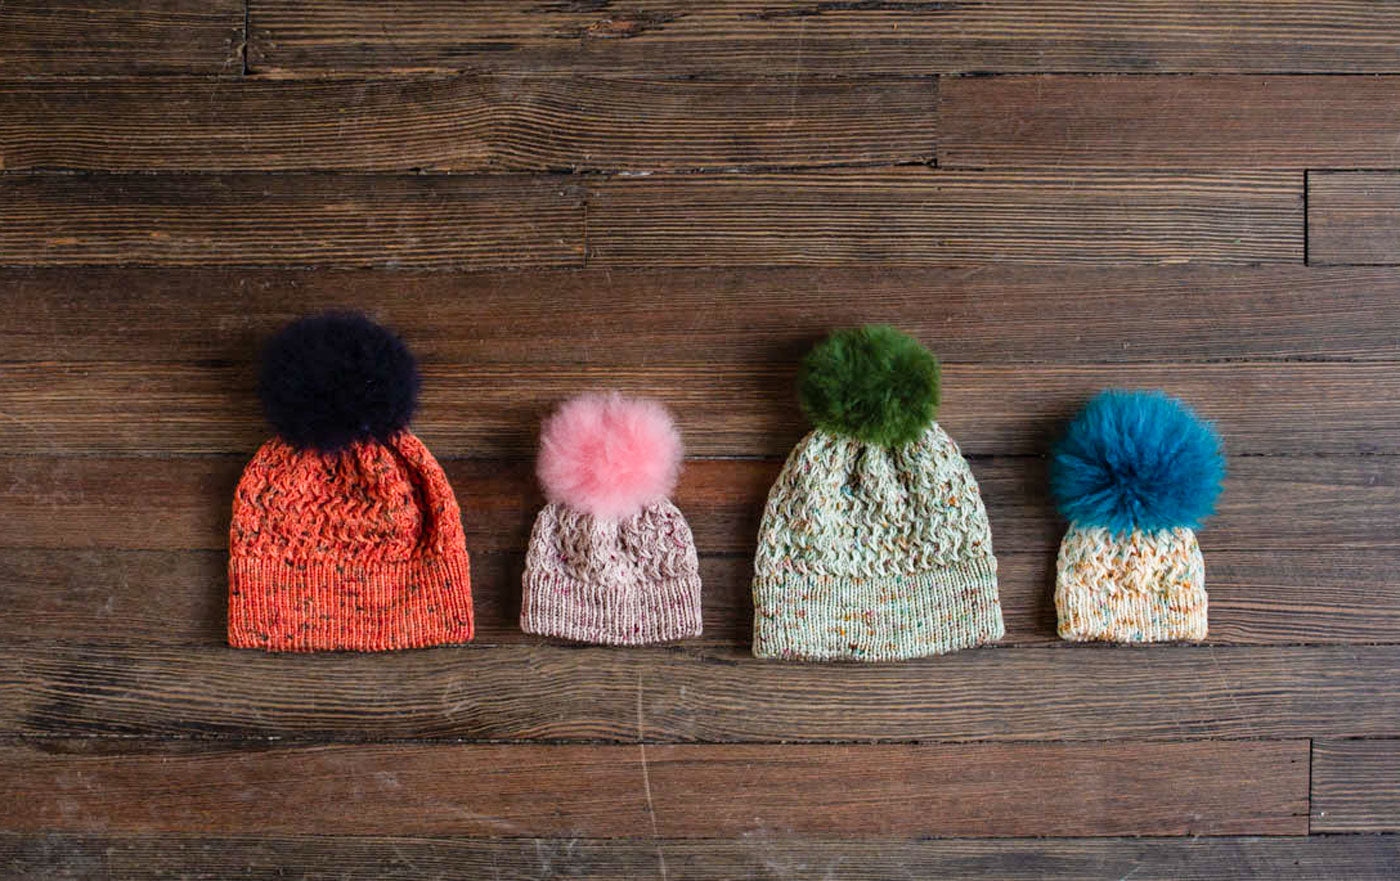 Four hand knit hats lay in a row on a dark wood background. They are made in a variety of sizes from newborn to adult, and a variety of hues of speckled, hand-dyed yarn. Each one is topped with a soft, alpaca fur pompom in a coordinating or contrasting color: a large hat in fiery orange with deep navy speckles is topped with a dark navy pompom; a small pink and grey hat is topped with a pale pink pompom; a sage green hat is topped with an olive green pompom; a tiny newborn hat in speckles of beige and turquoise is topped with a vibrant turquoise pompom. 